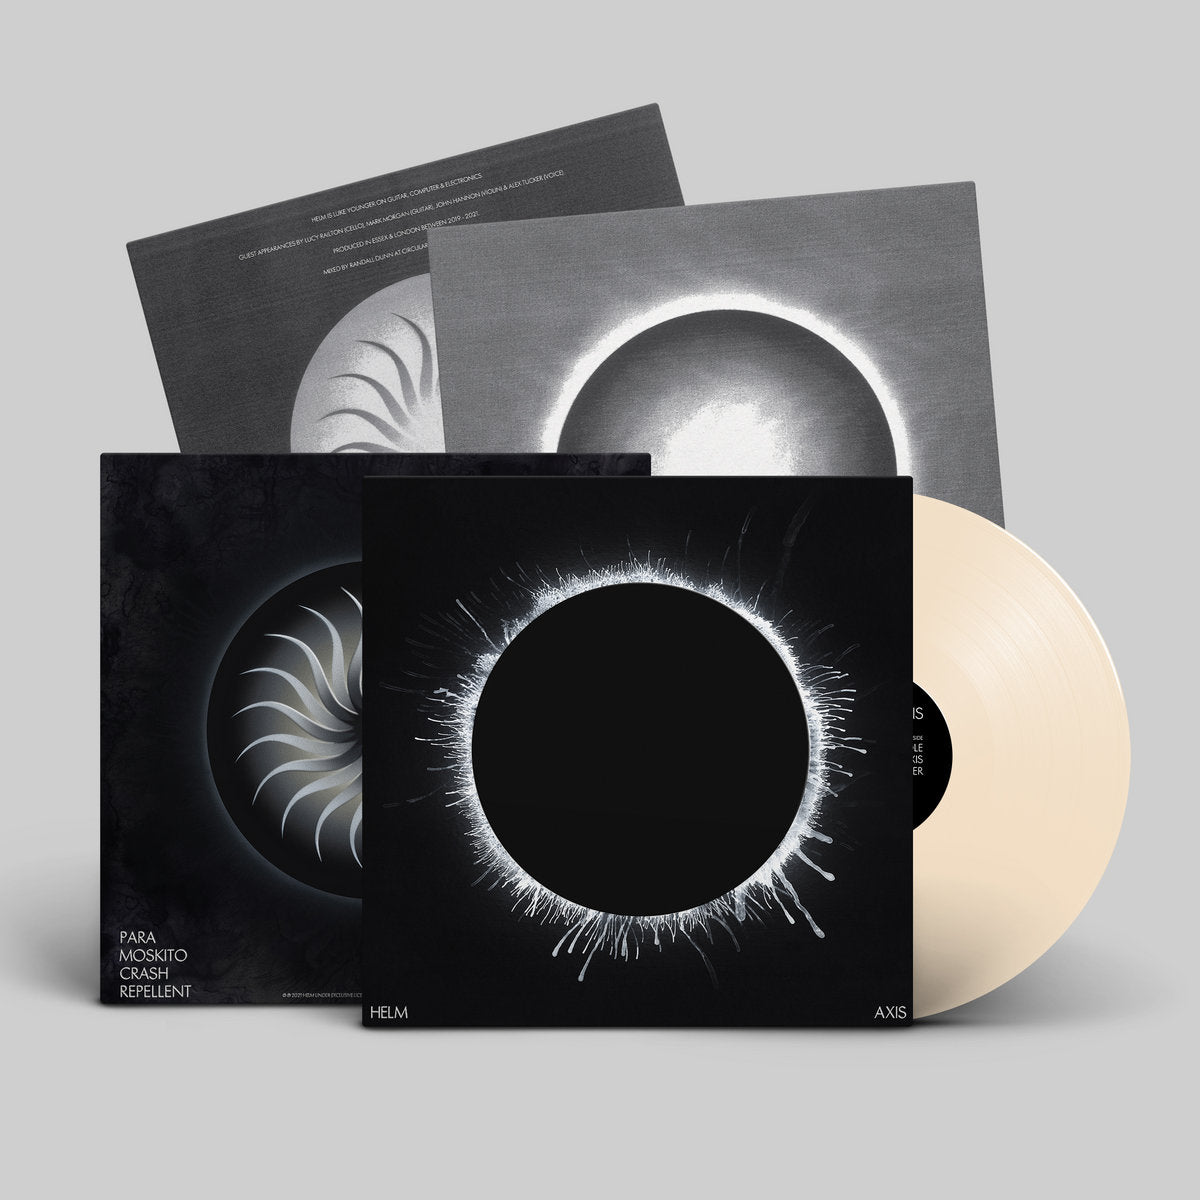 Helm - Axis (Limited Edition of 400 on Bone White Vinyl)